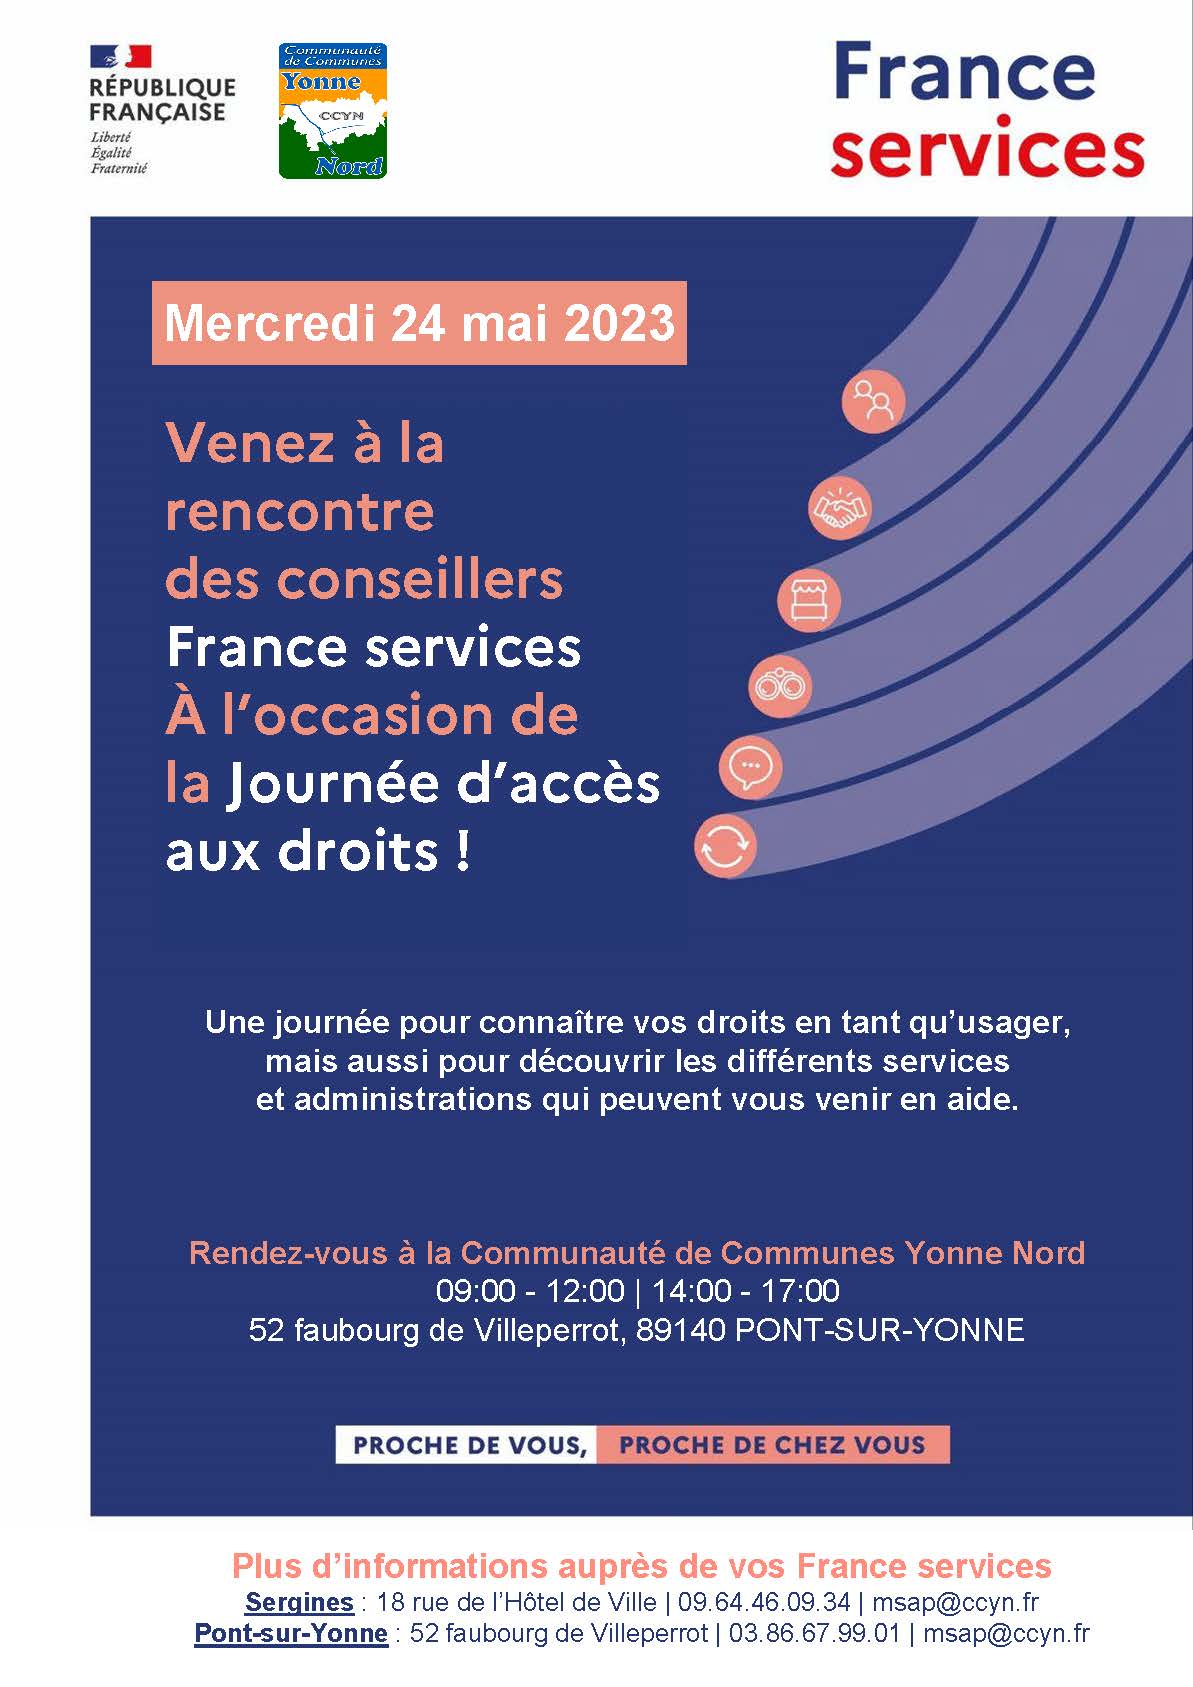 france services